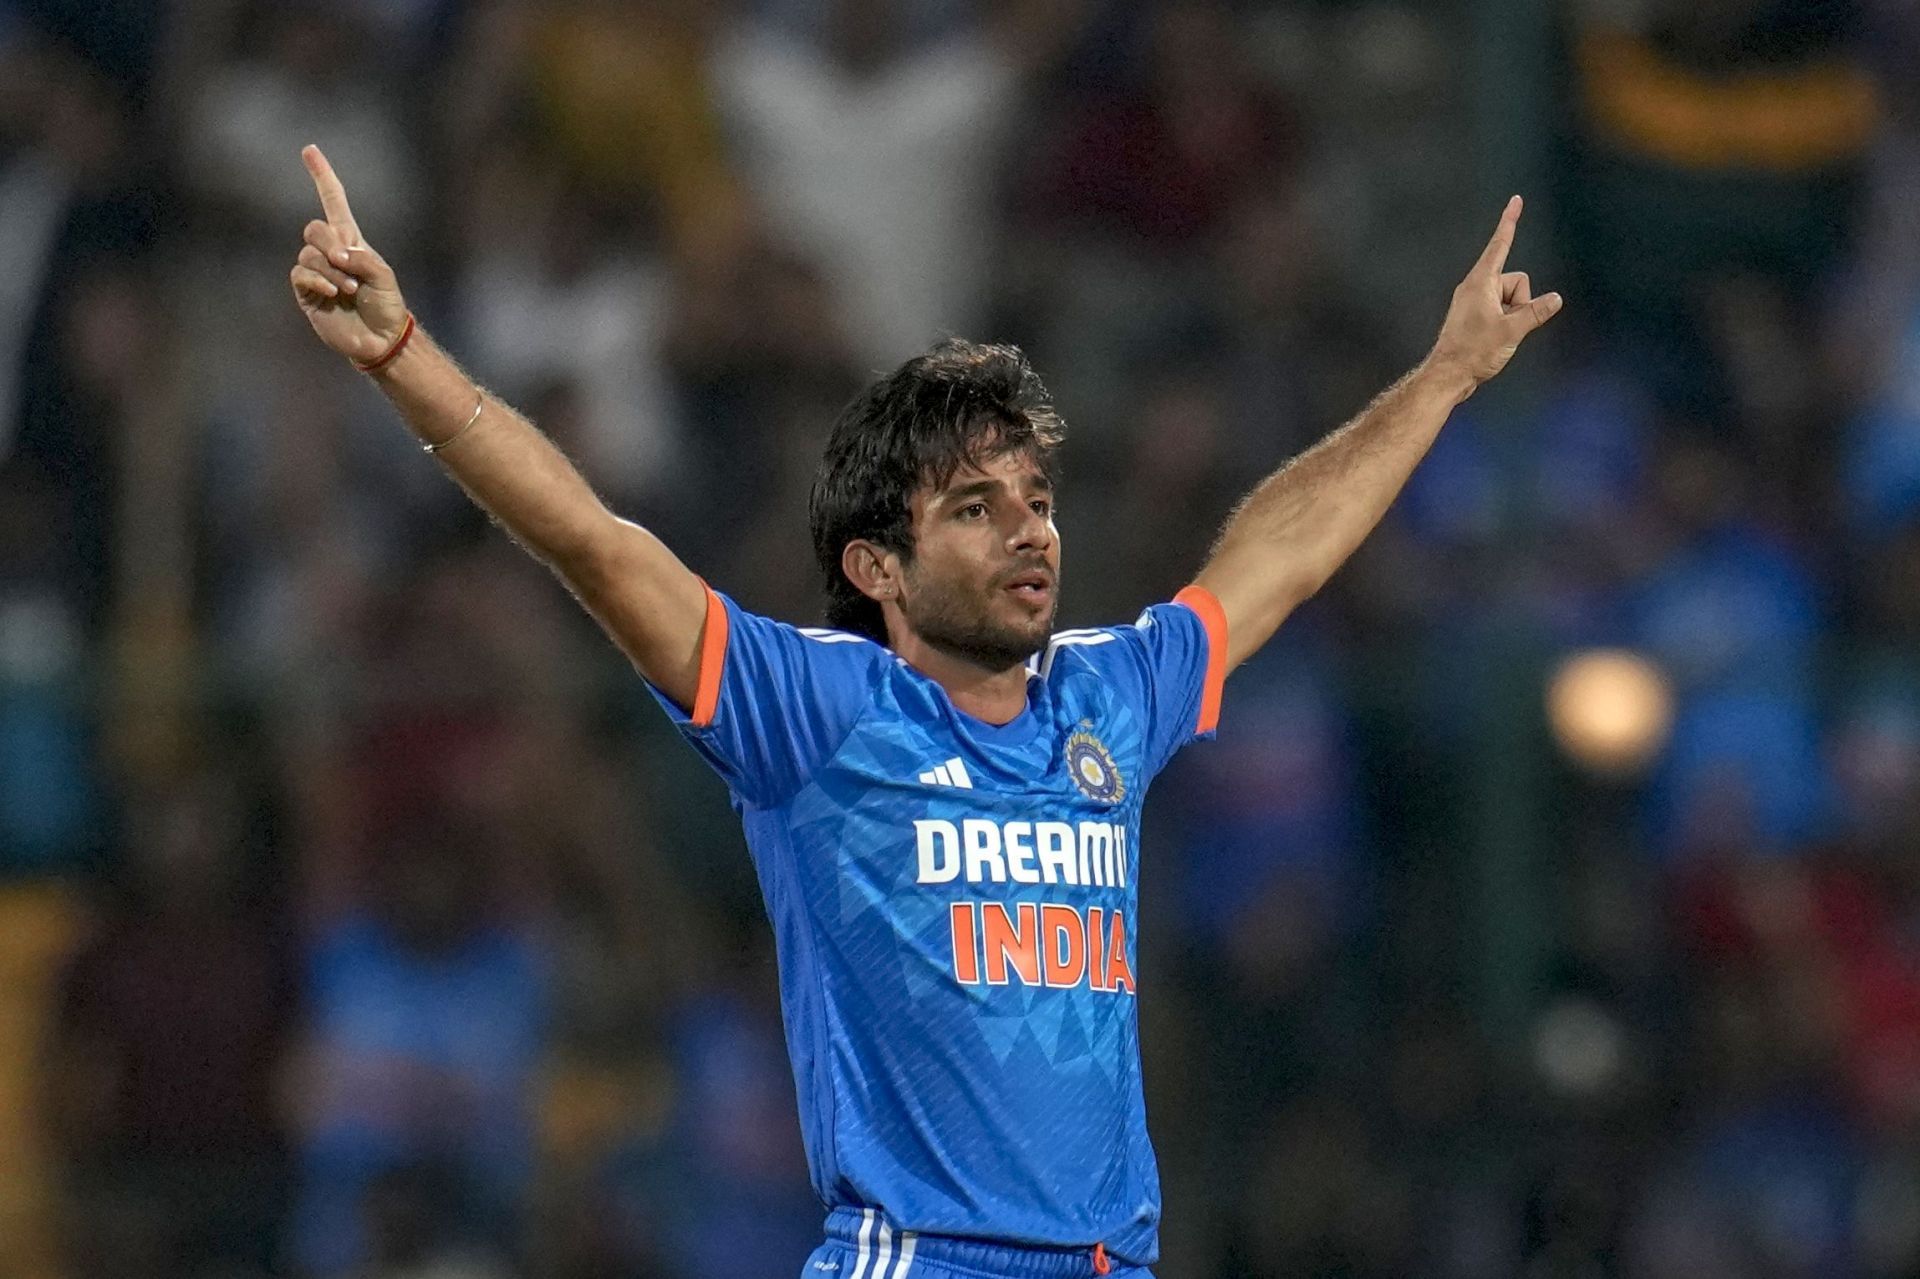 Ravi Bishnoi was the highest wicket-taker in India&#039;s T20I series win against Australia. [P/C; AP]